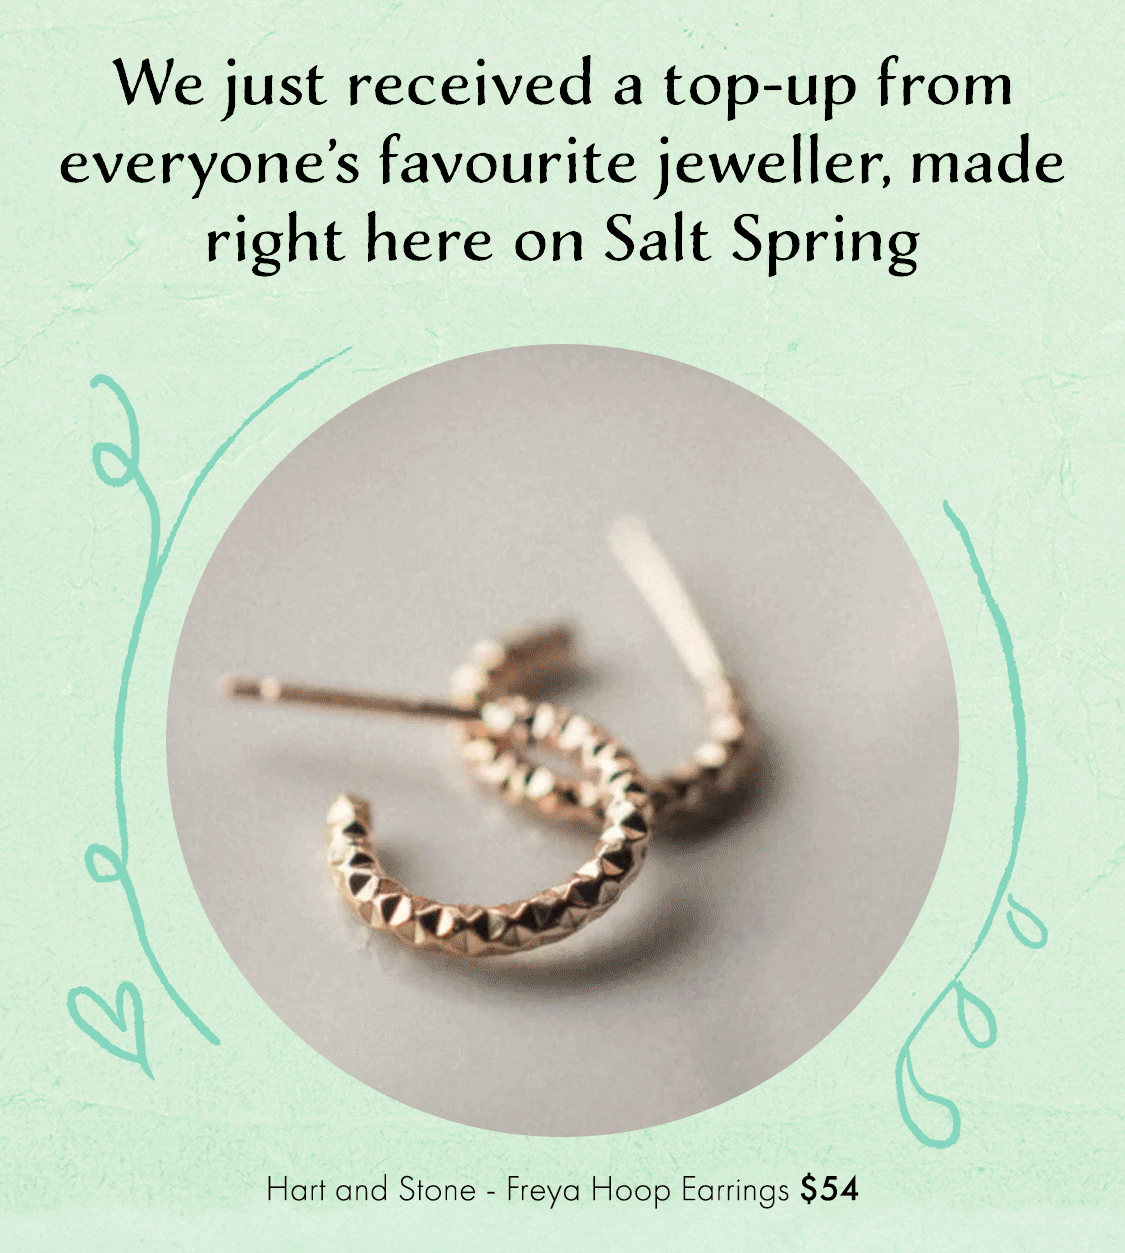 We just received a top-up from everyone’s favourite jeweller, made right here on Salt Spring!